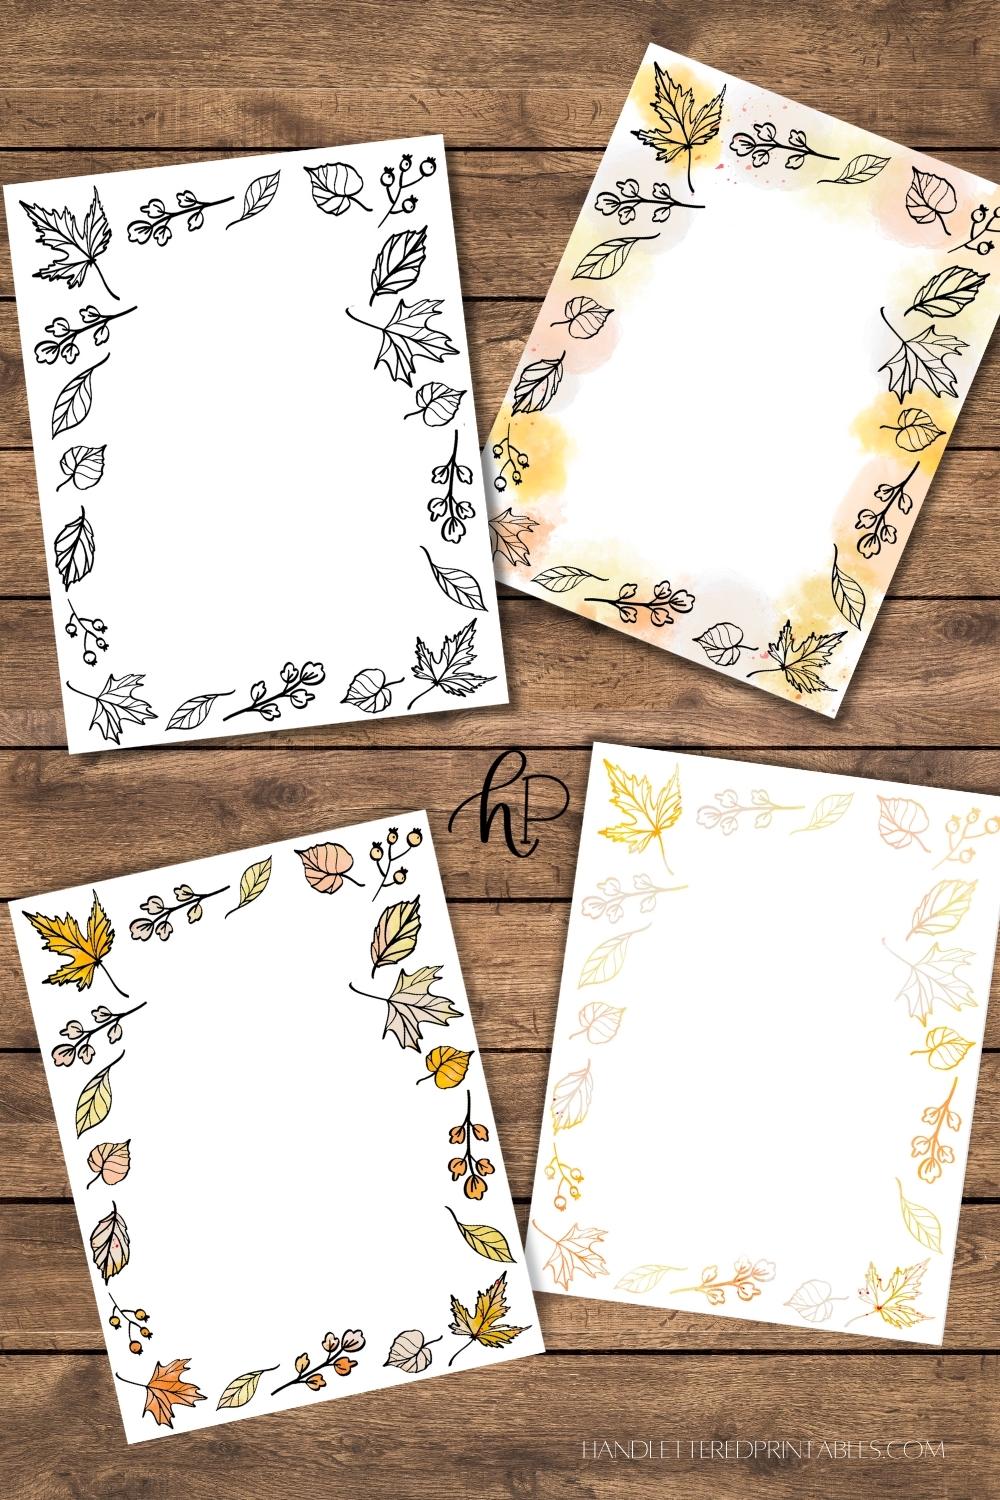 Free printable fall borders (four versions with autumn leaves and watercolor details)